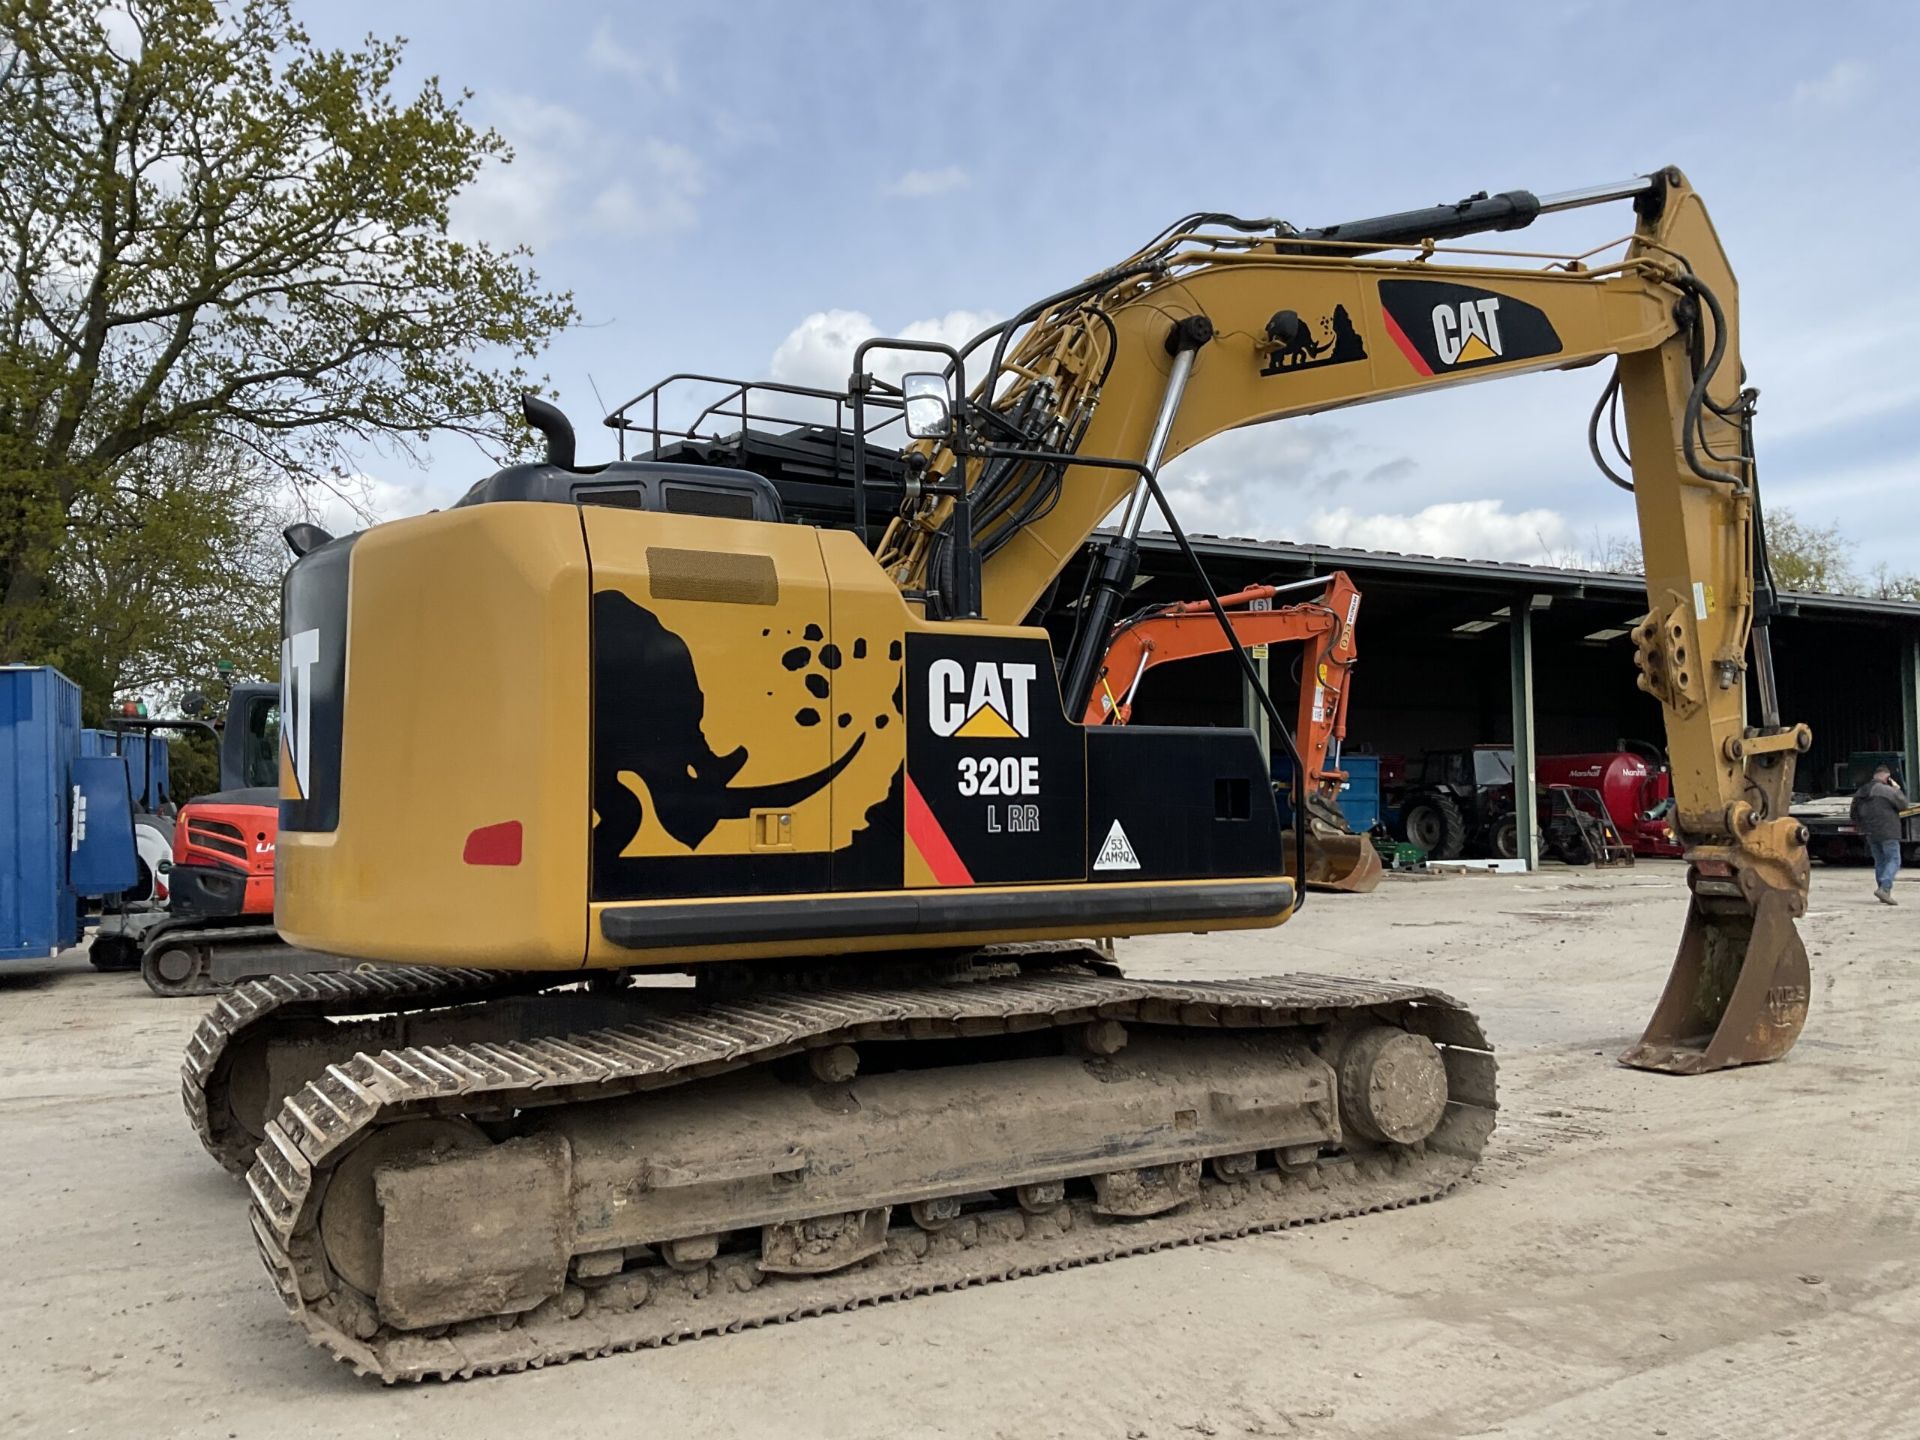 CAT 320 EL RR EXCAVATOR READY TO BOOST YOUR PROJECTS - Bild 6 aus 11